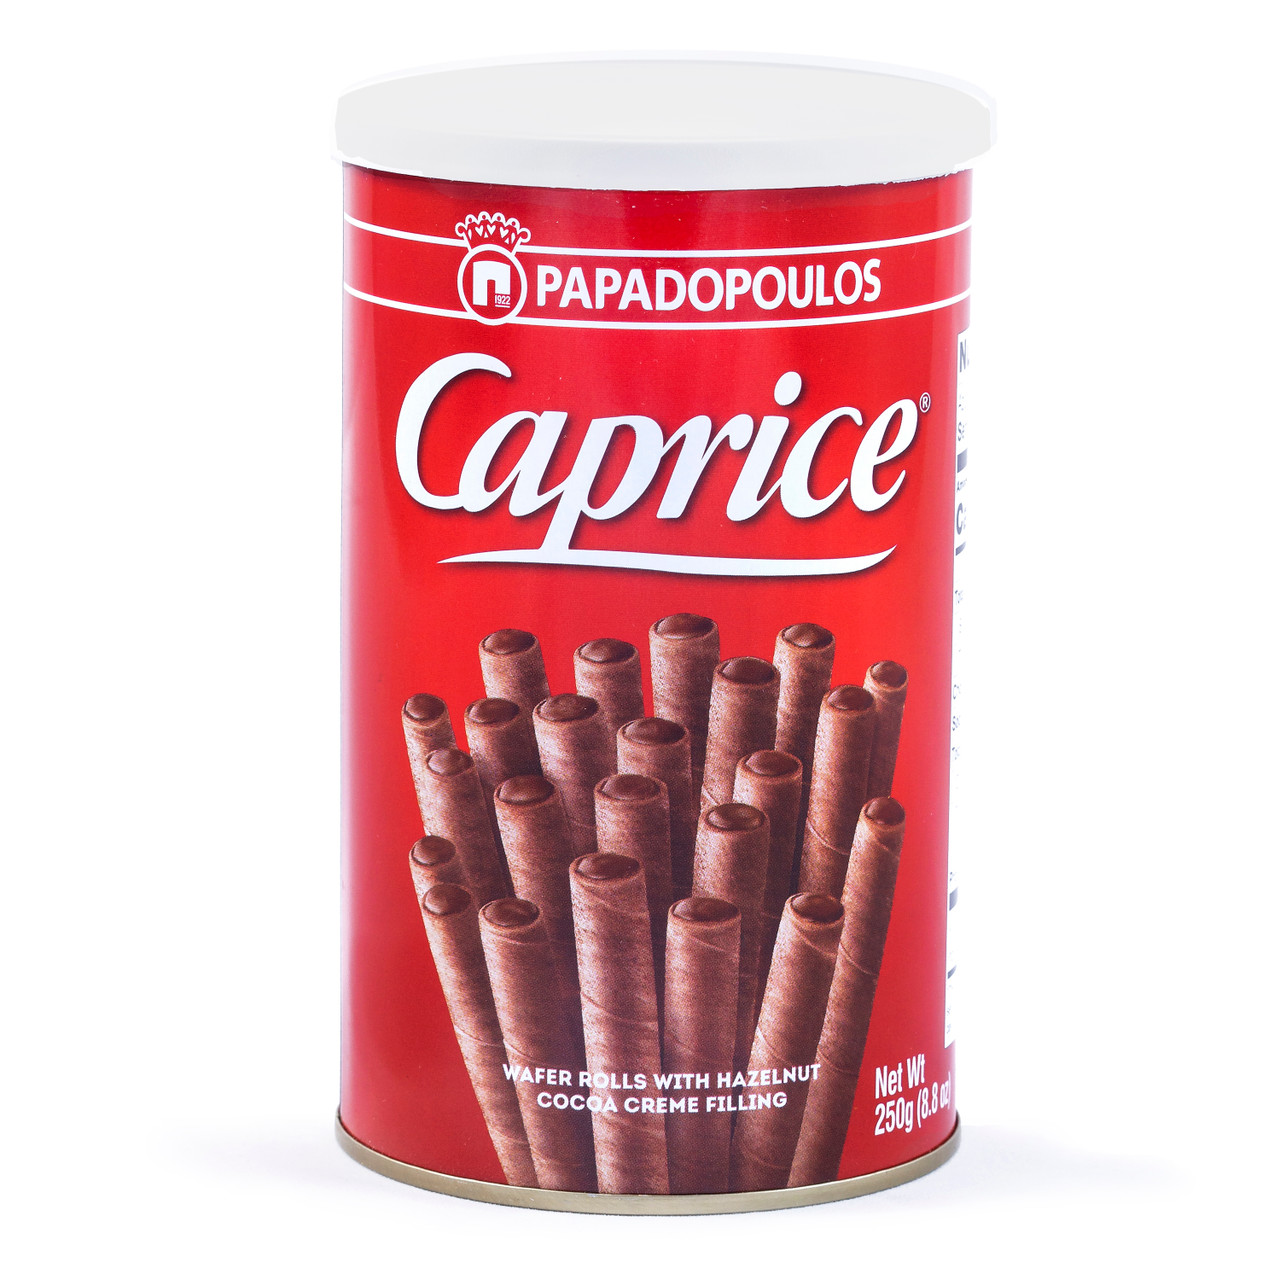 Papadopoulos Caprice Wafer Rolls with Praline Filling 250 gr